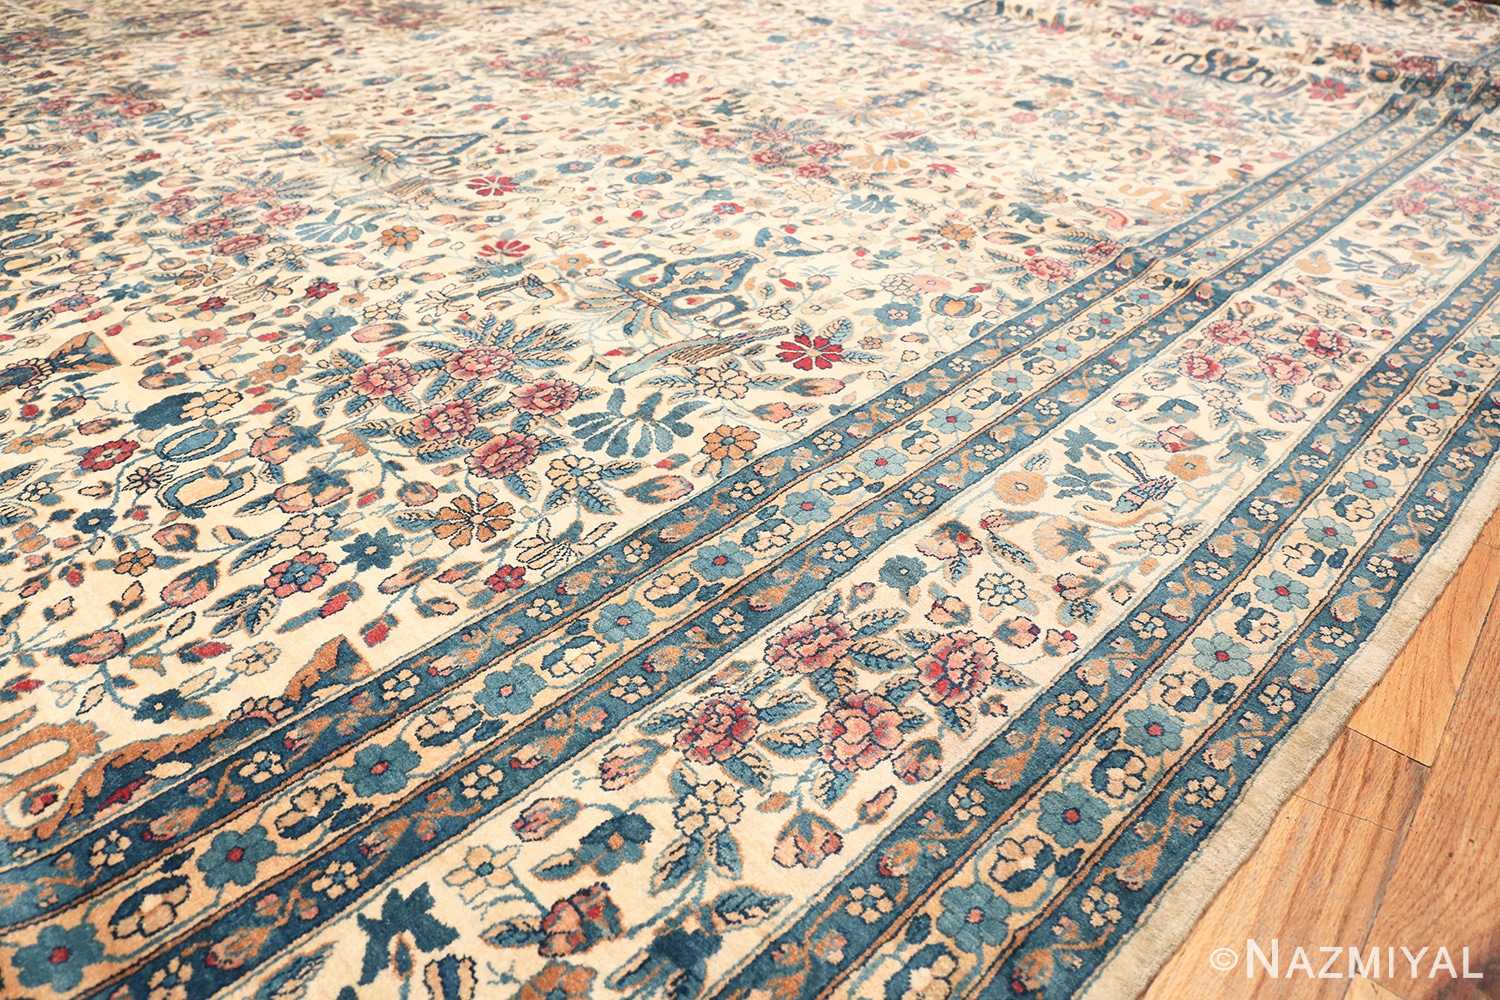 Field Of Oversized Antique Persian Kerman Rug 48370 by Nazmiyal NYC